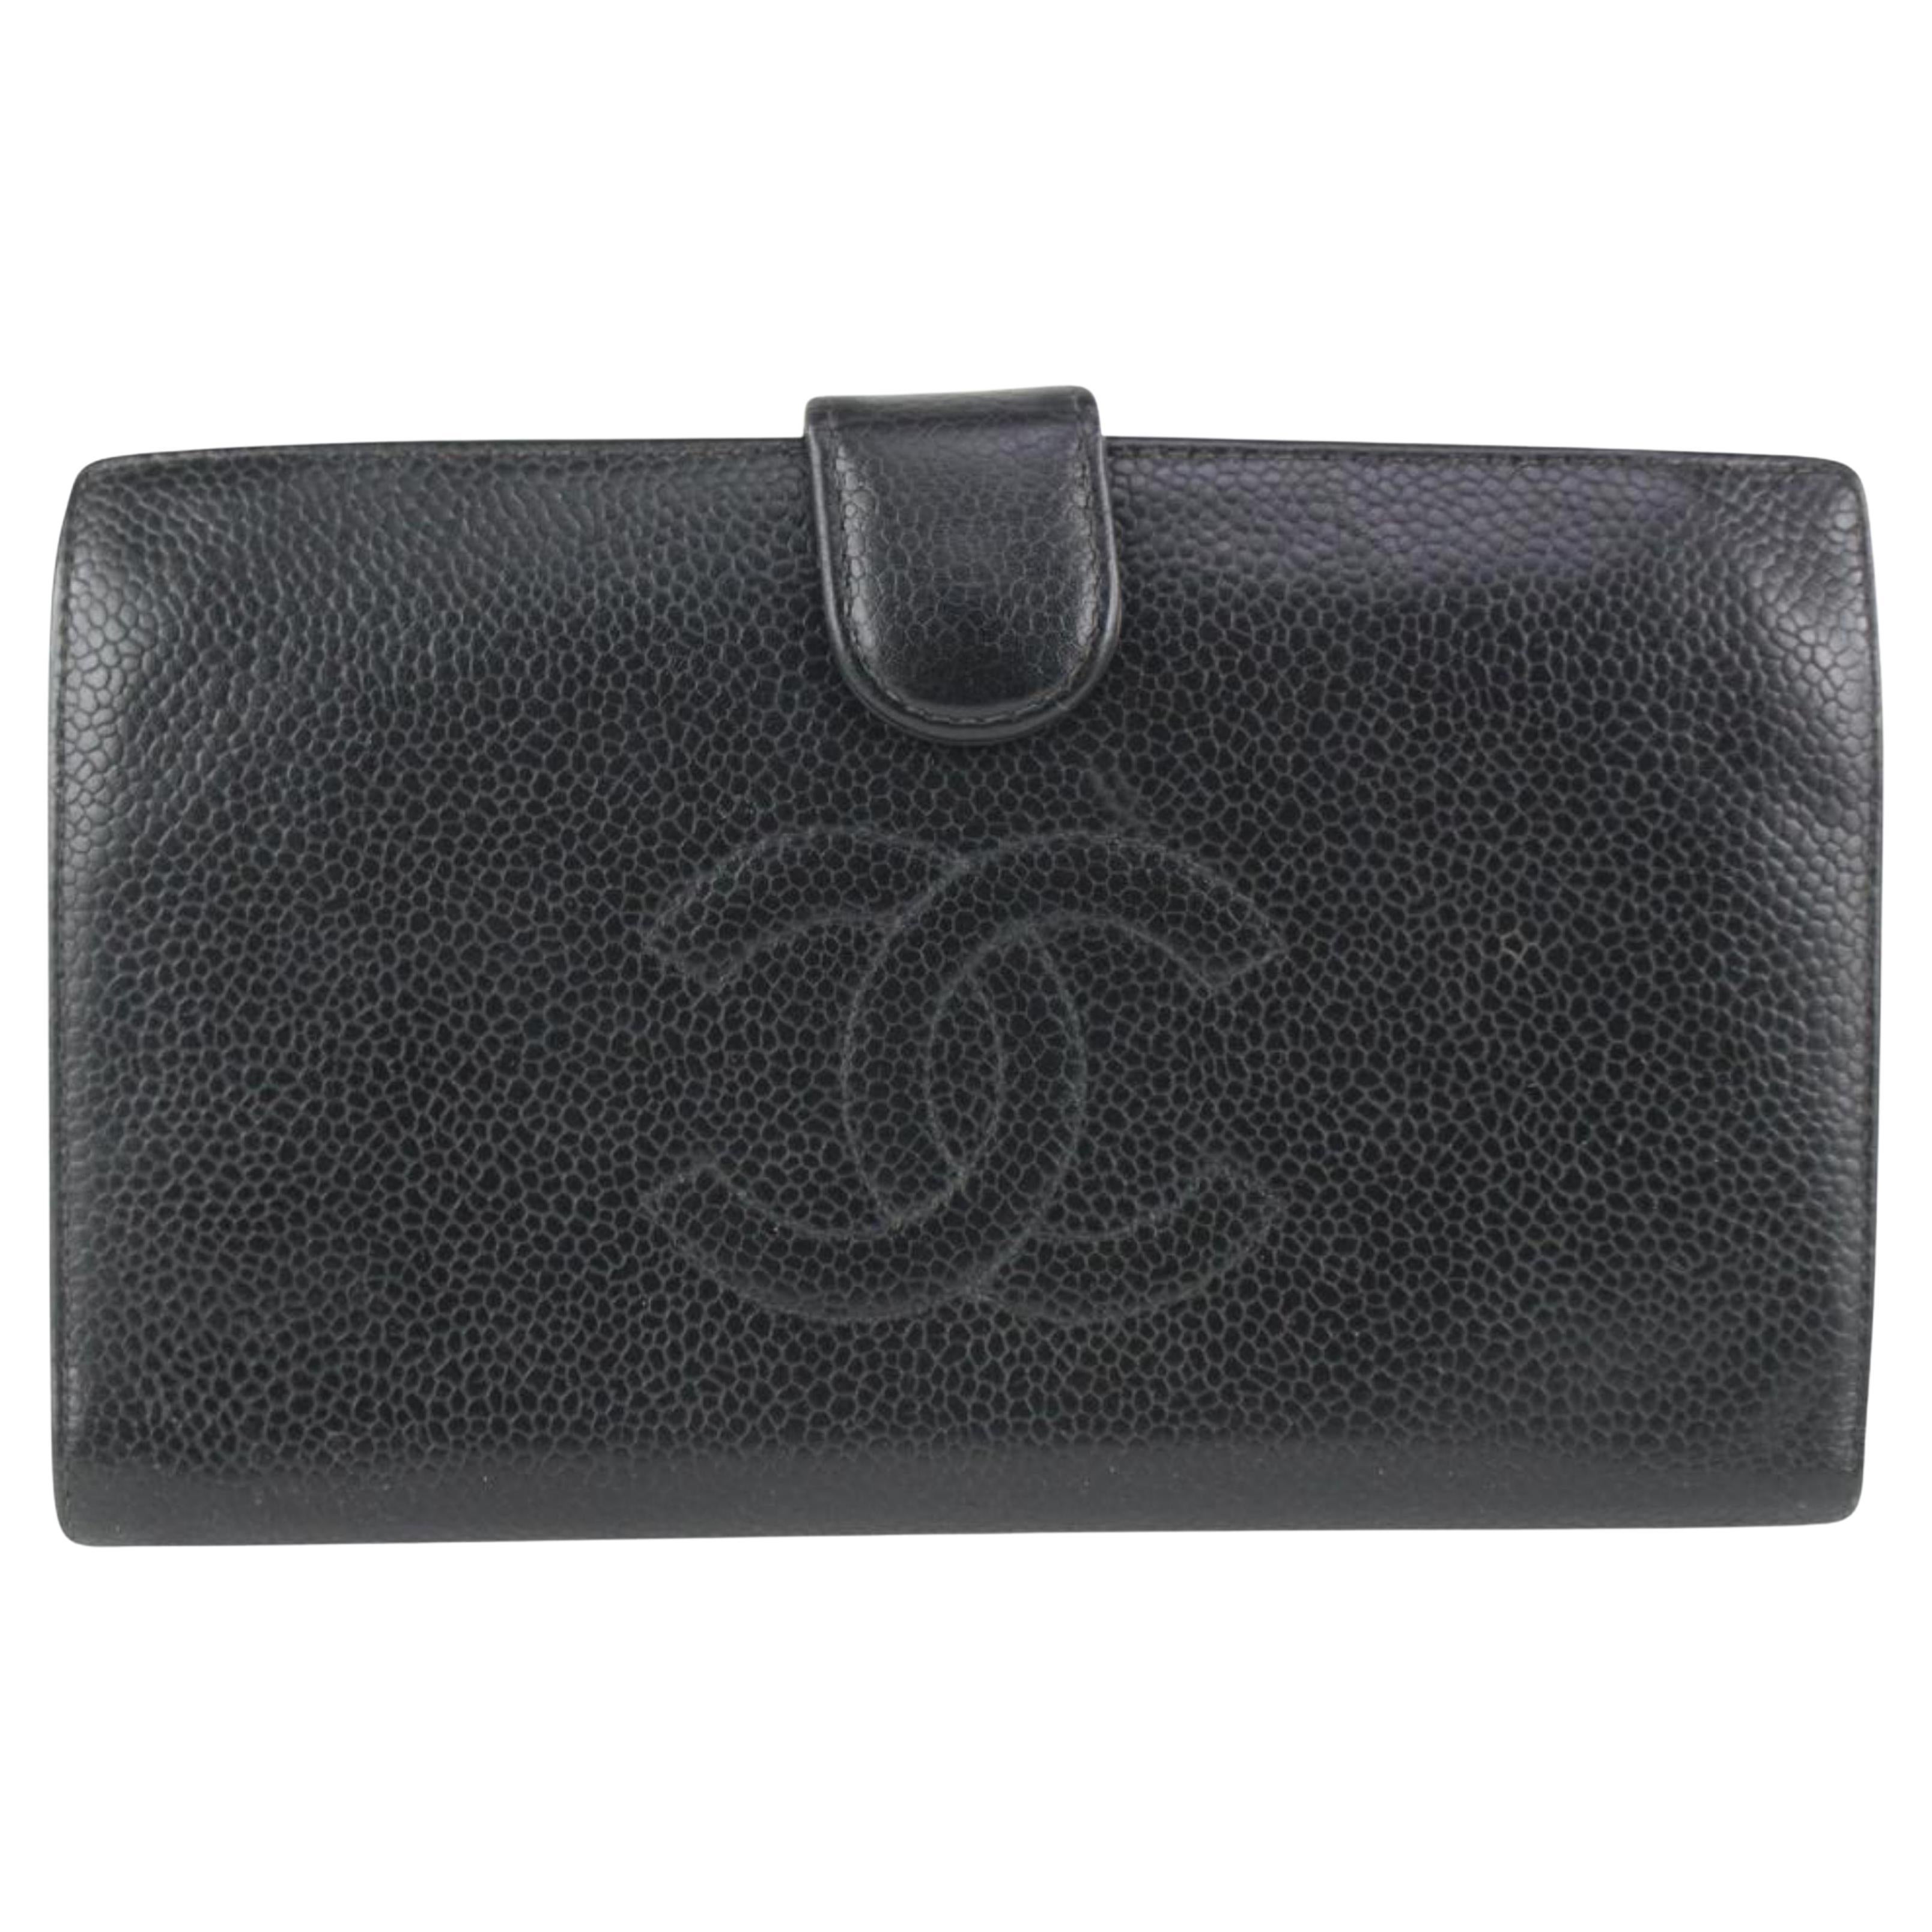 Chanel 2019 Iridescent Black Leather Caviar Quilted CC Card Holder For ...